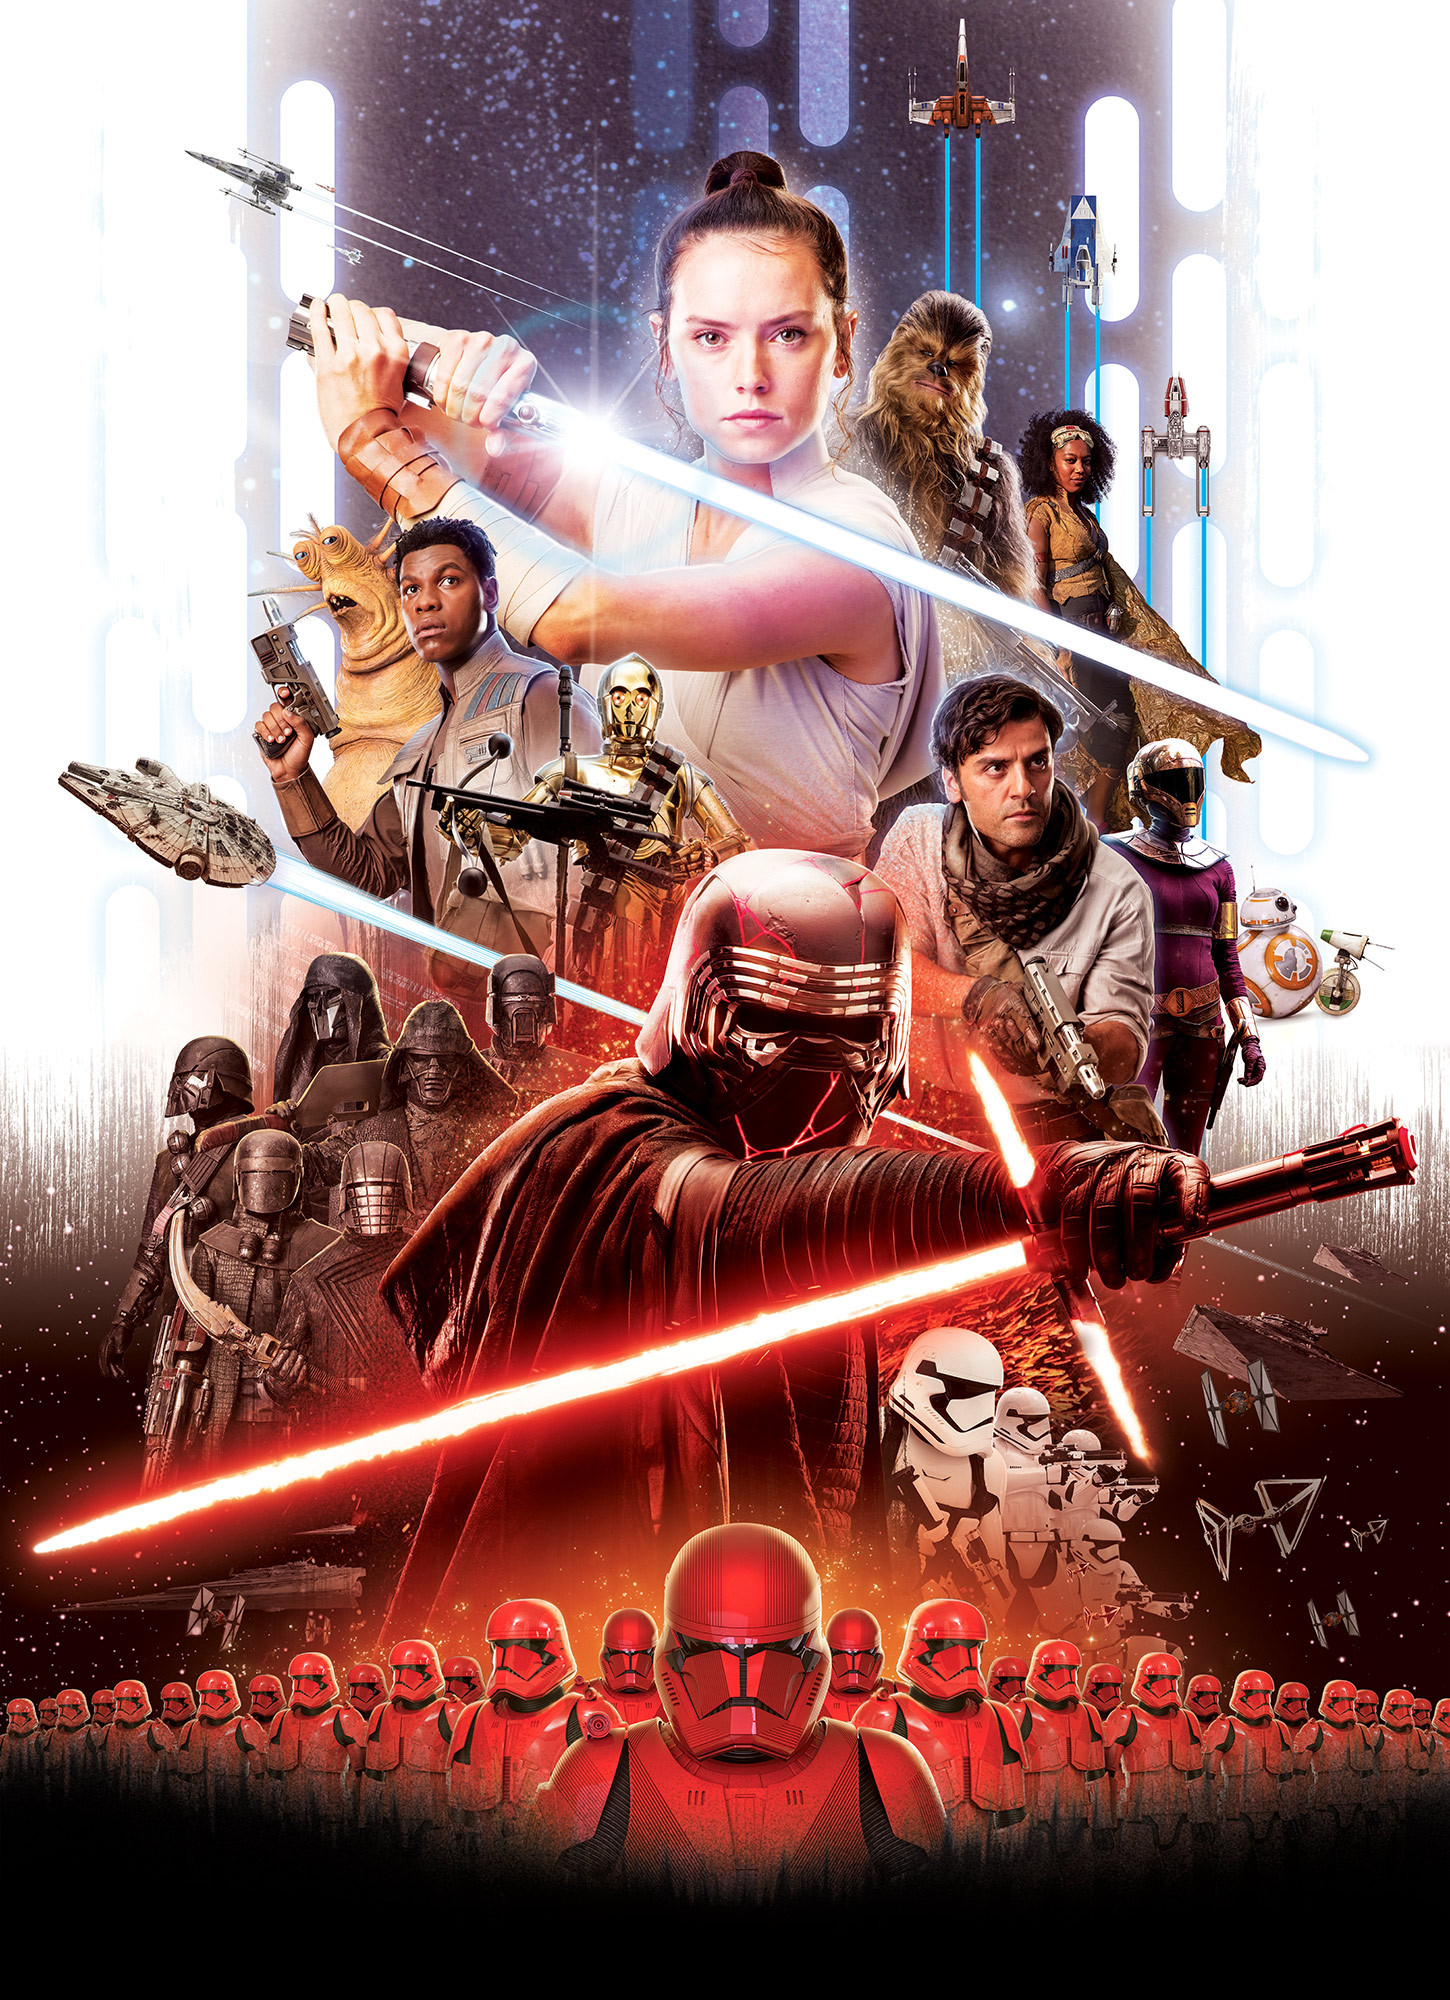 Photomural Star Wars Movie Poster Rey ( 4-4113) from Disney